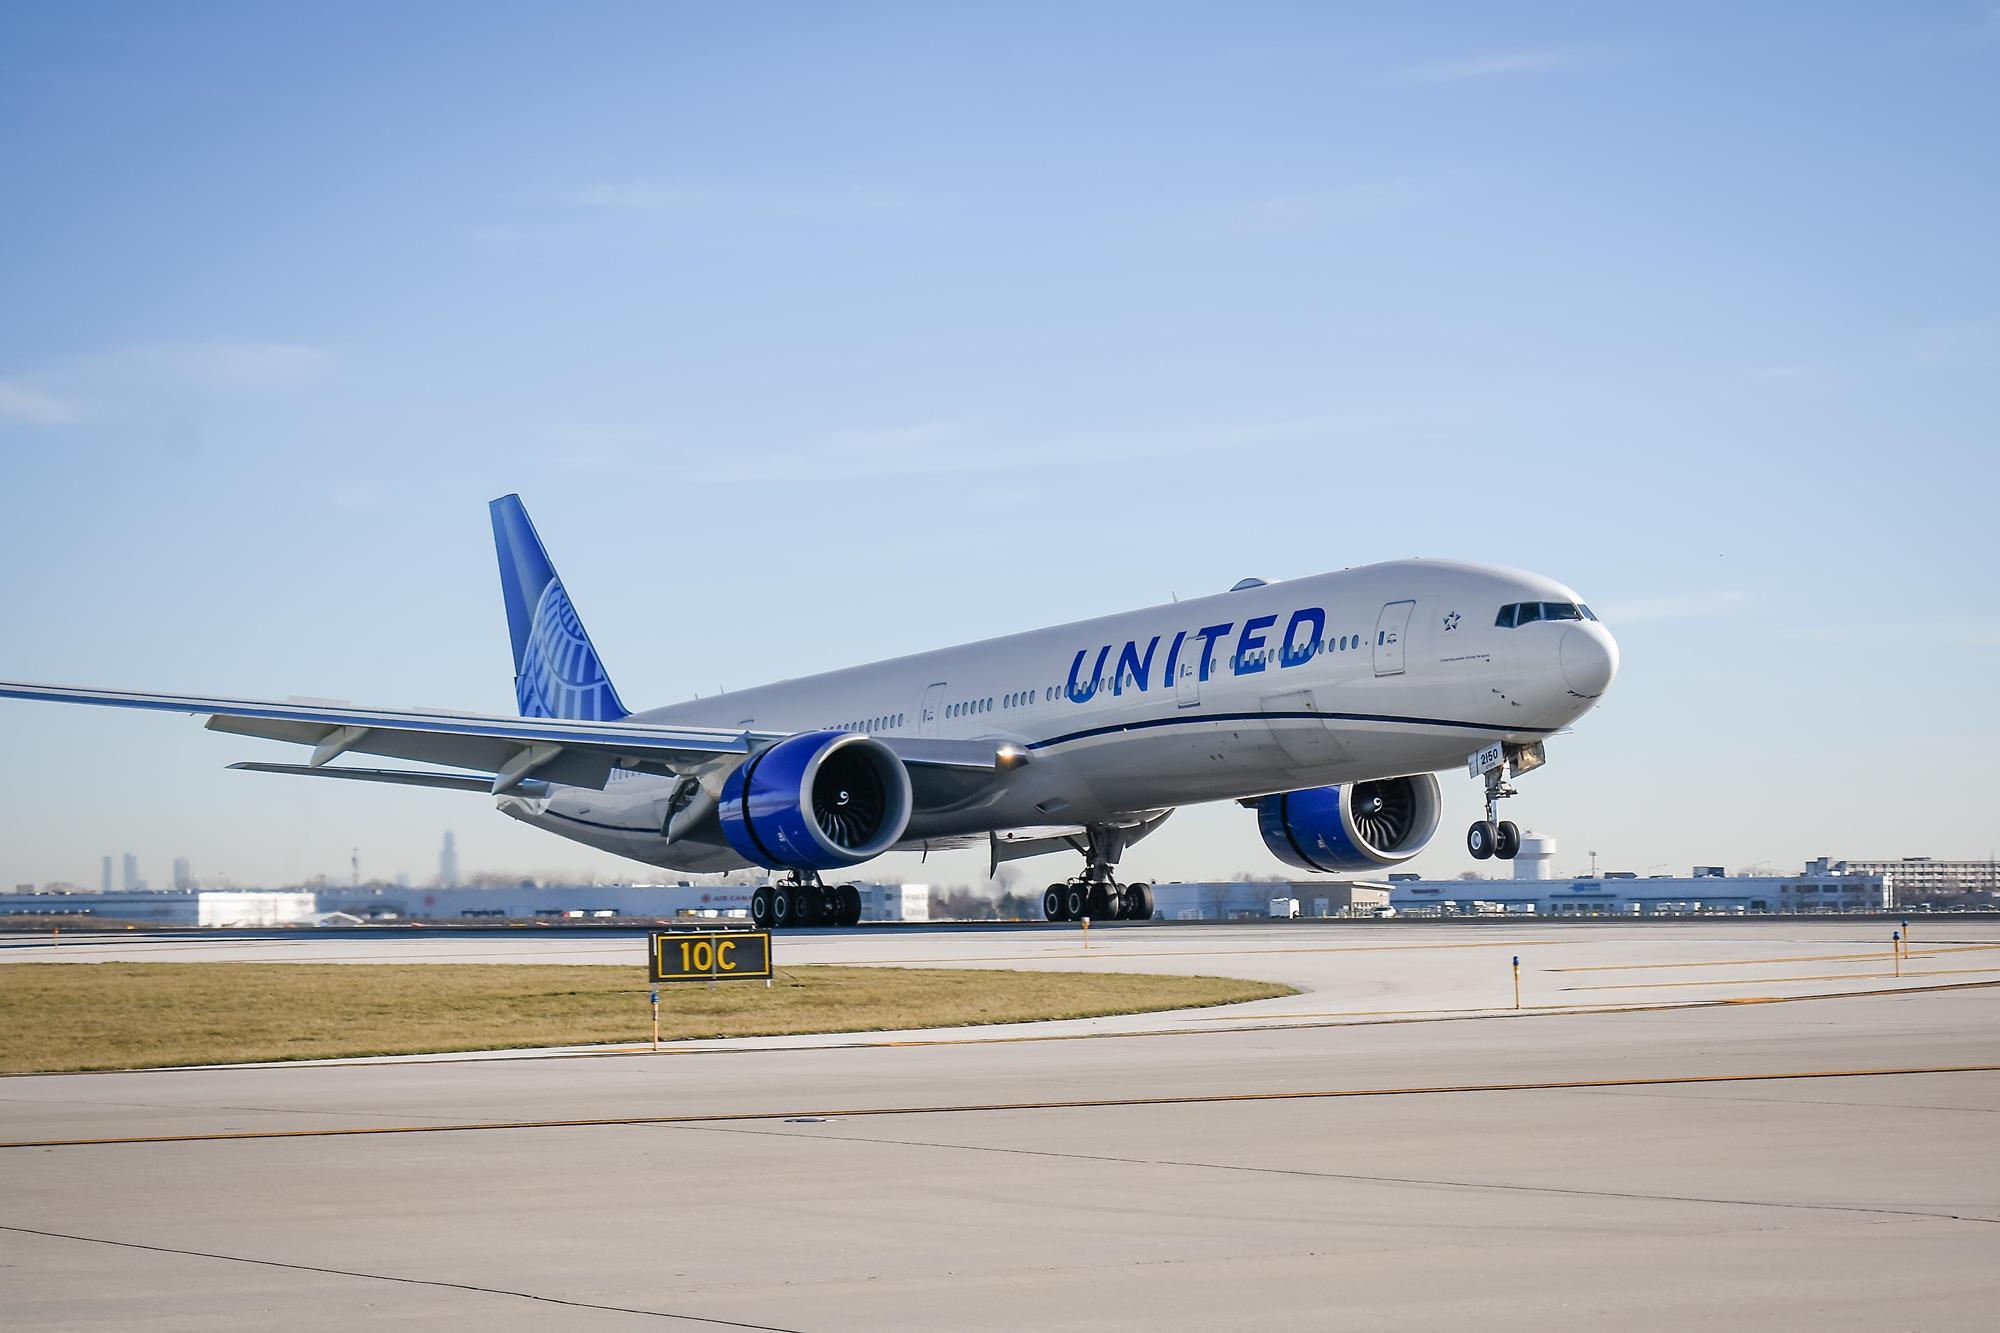 United Airlines Flight Came Within 800 Ft. of Ocean After Nose Dive